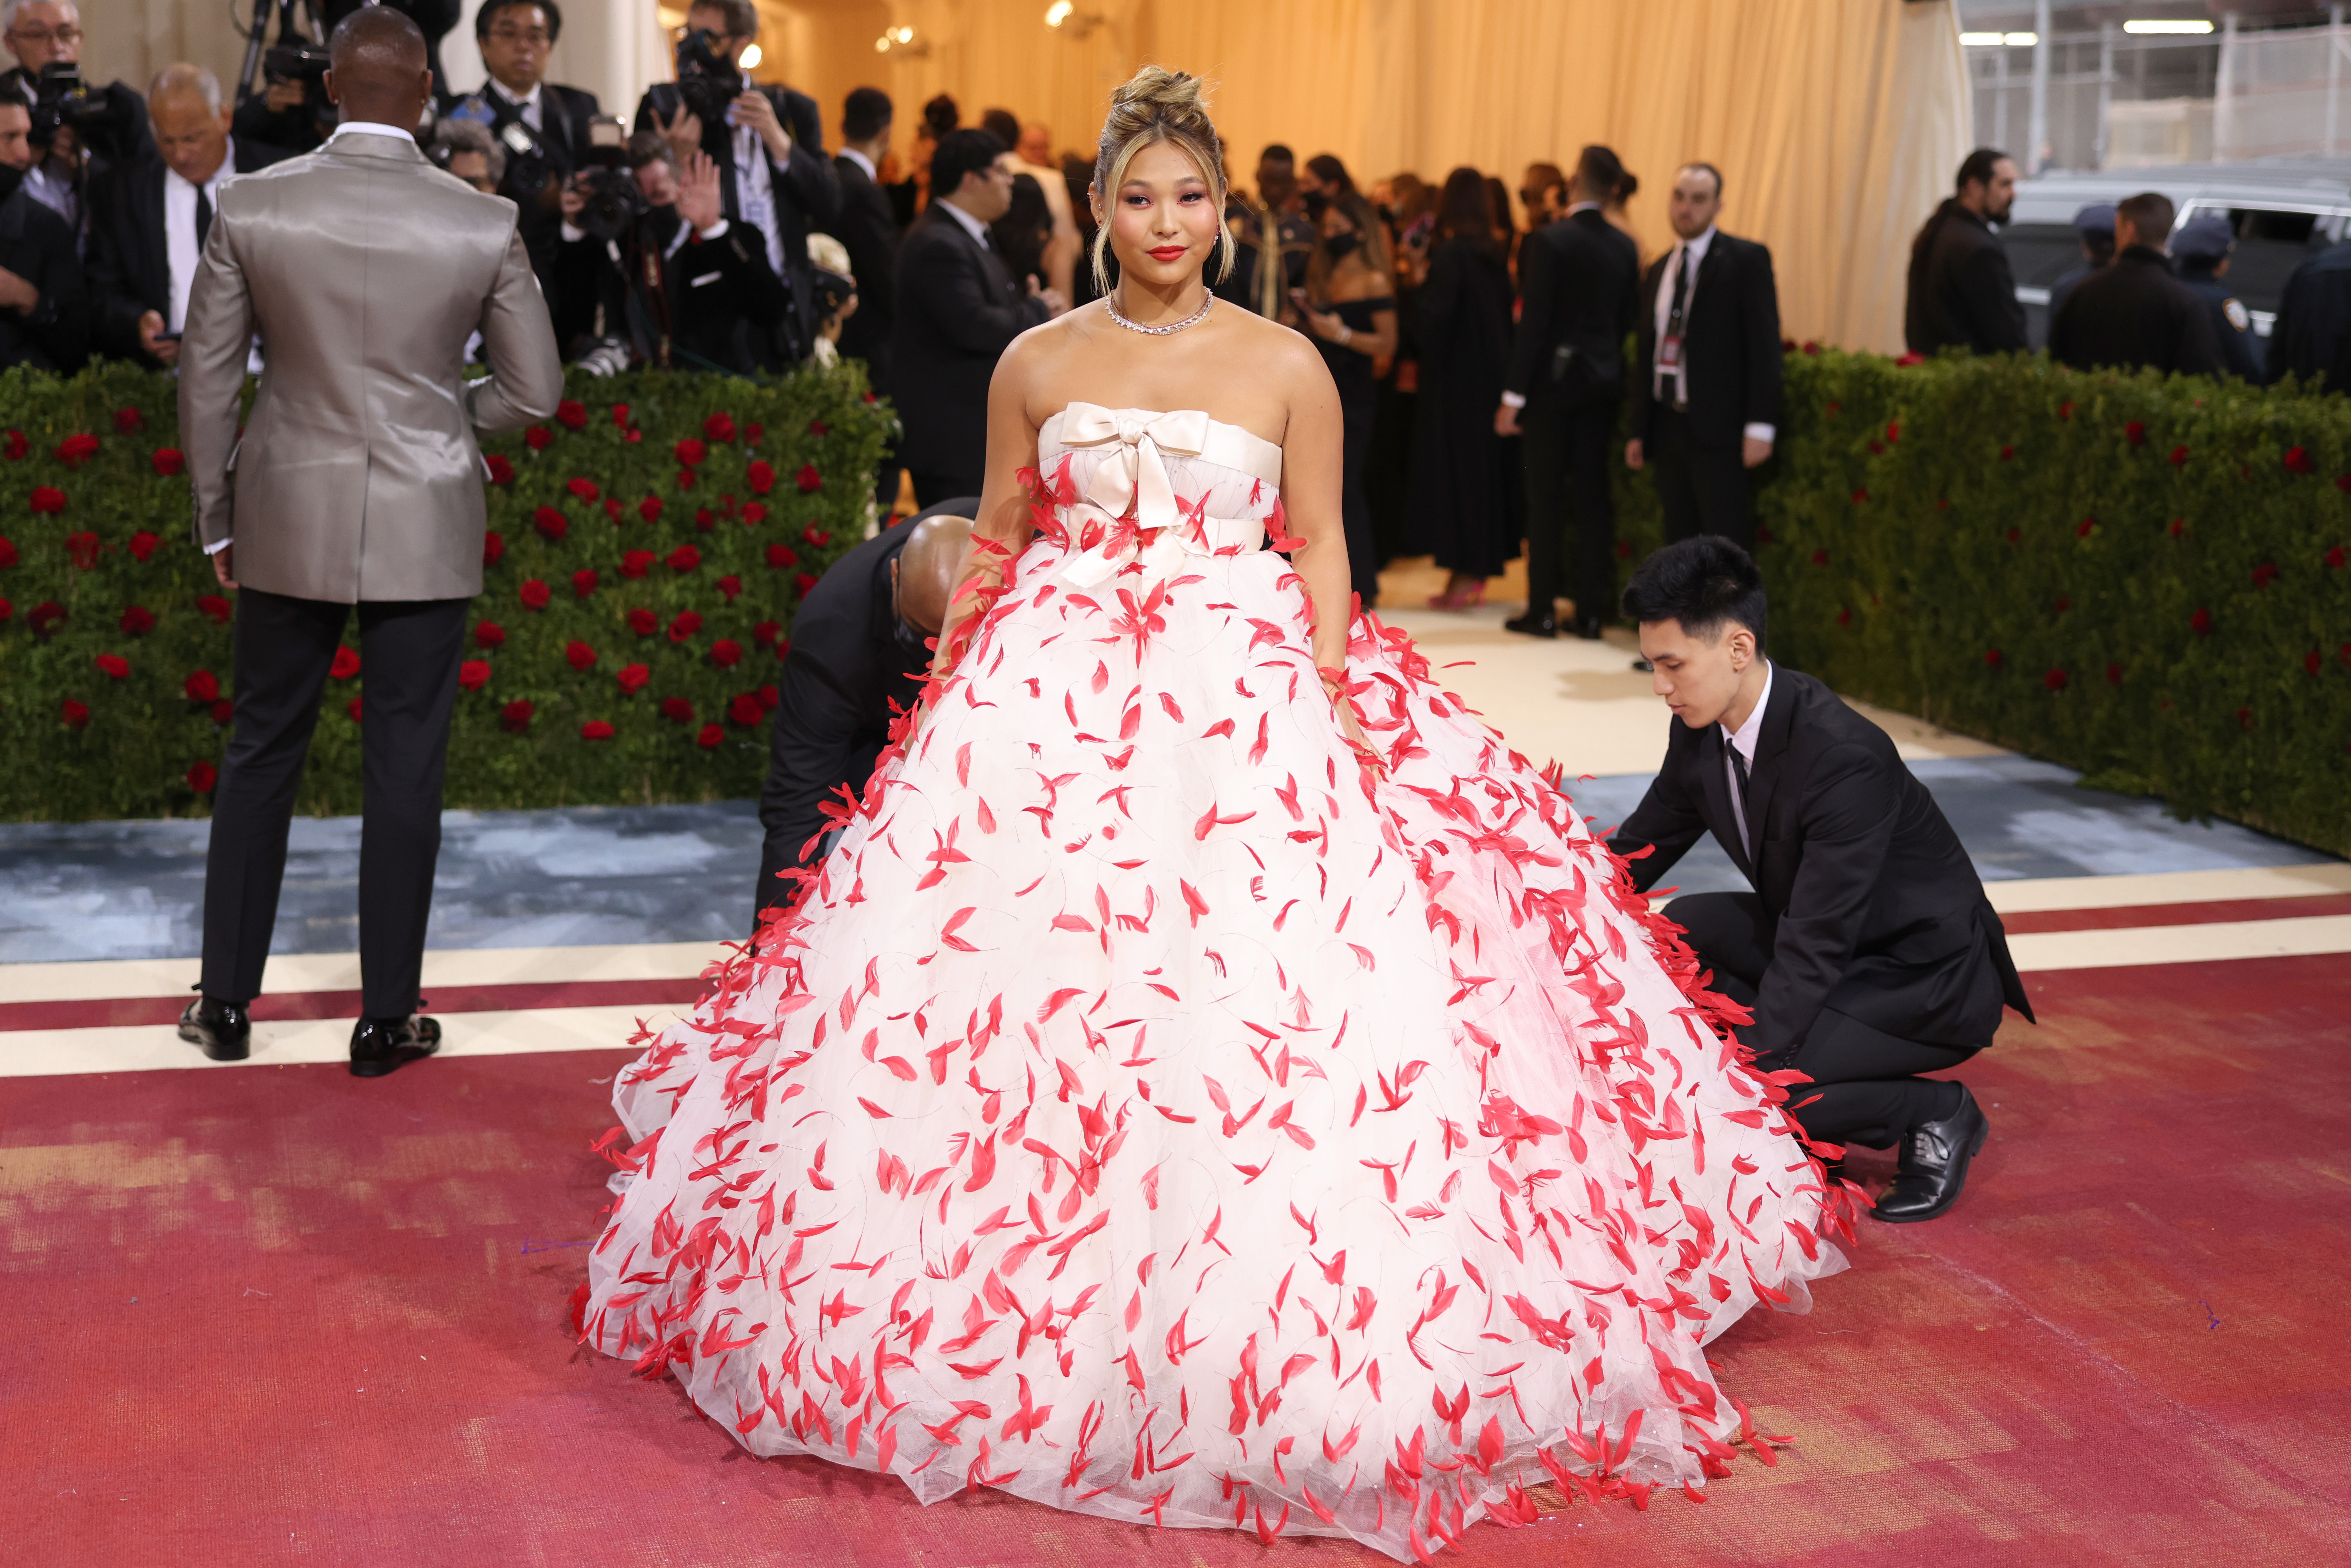 See Star Athletes' Looks at the 2022 Met Gala Event – NBC New York